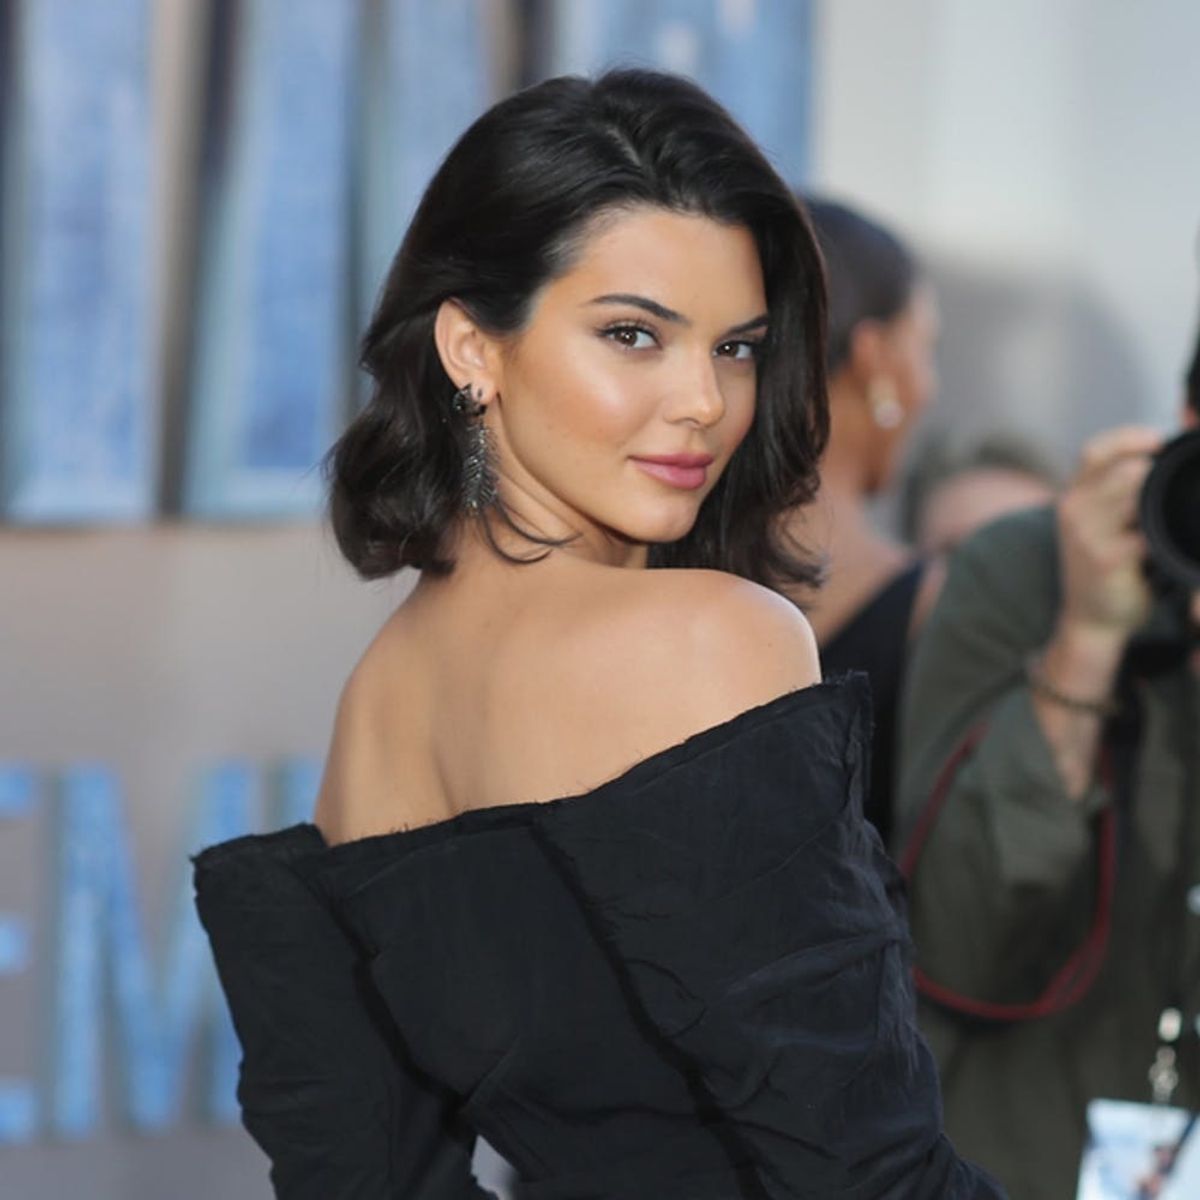 Here’s How to Get Kendall Jenner’s Marilyn Monroe-Inspired Relaxed Bob